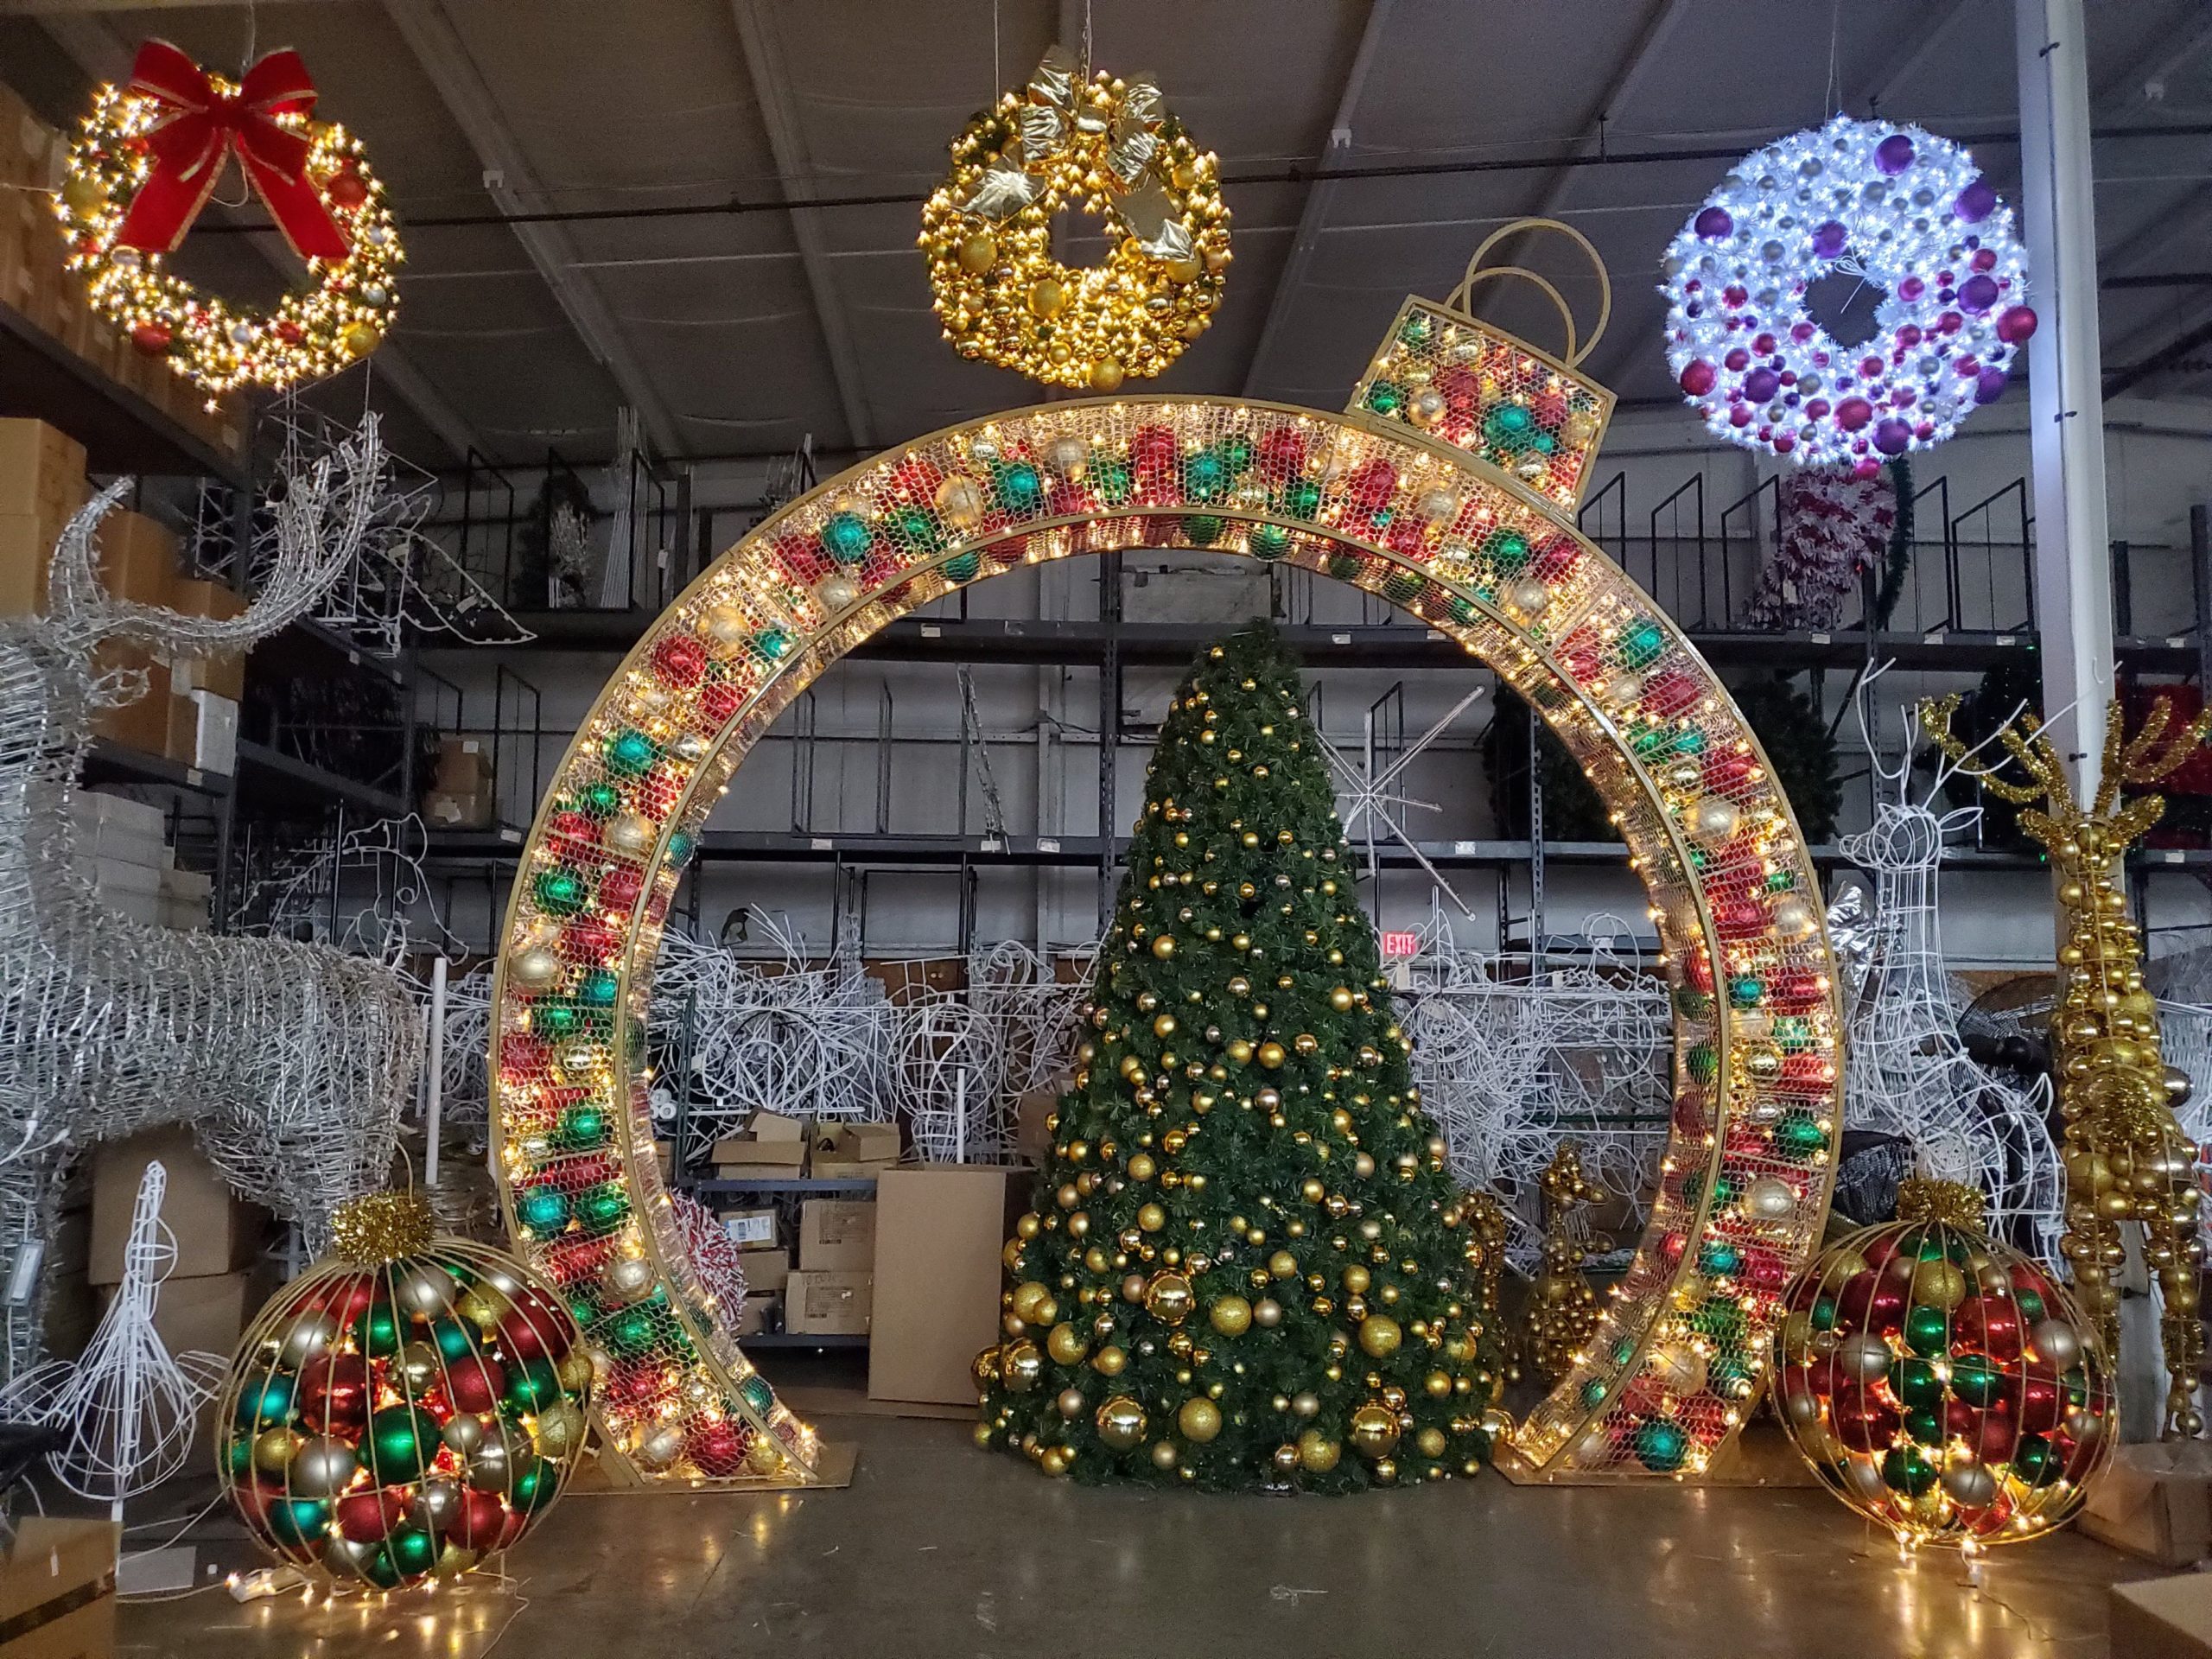 Find Outdoor Christmas Decorations For Your Home | Big